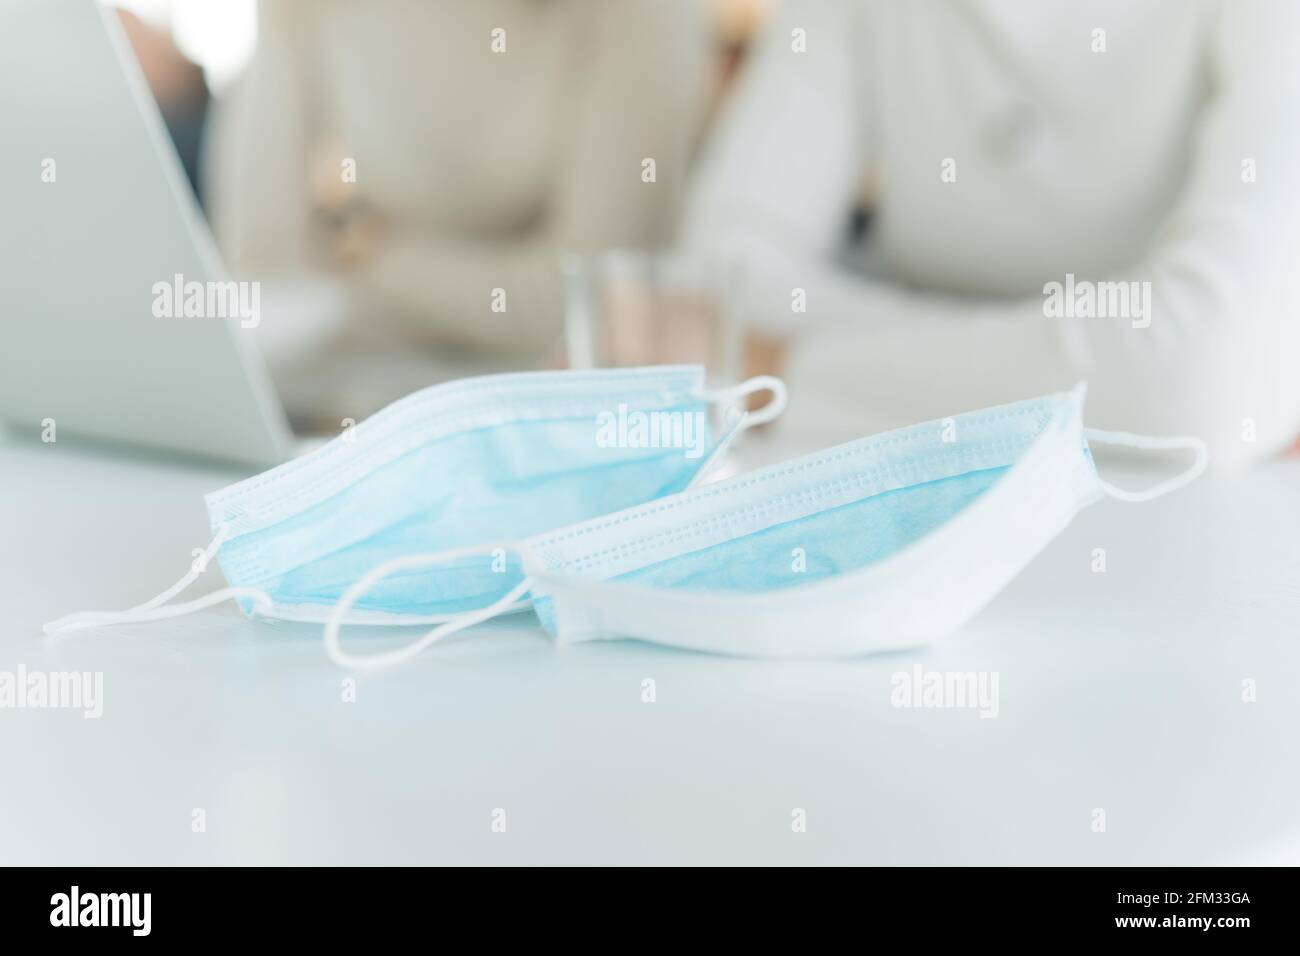 Close-up of two face masks on a table and two woman working on a laptop in background Stock Photo